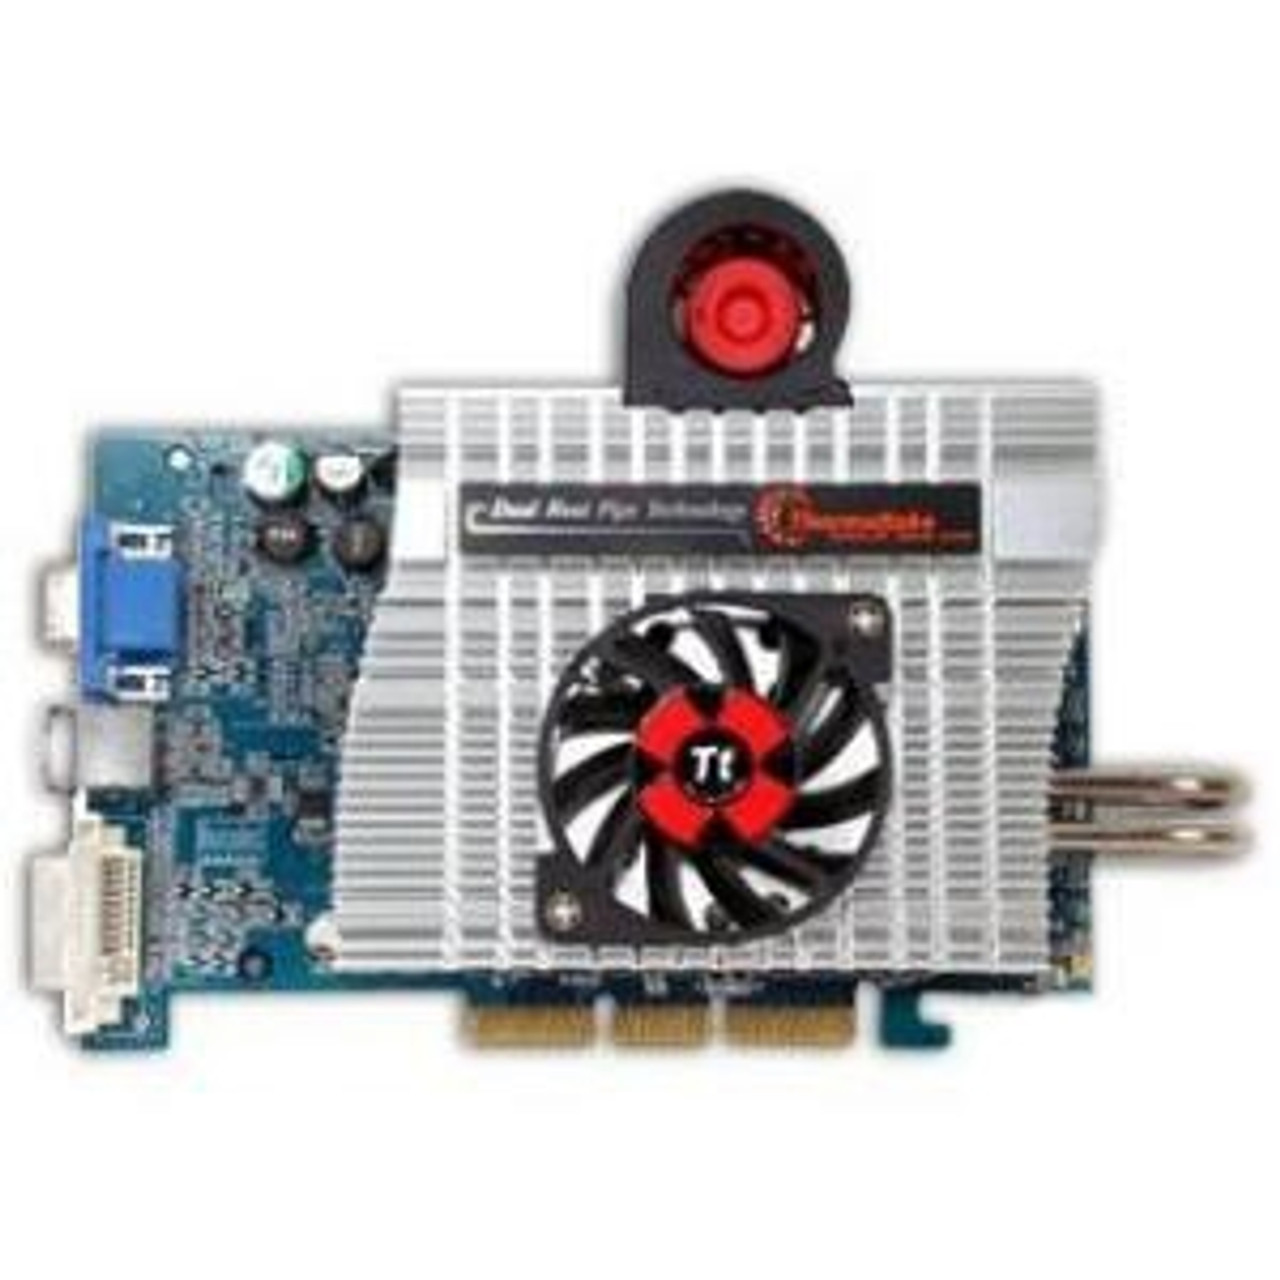 A1919 Thermaltake Extreme Giant III Chipset & VGA Cooler